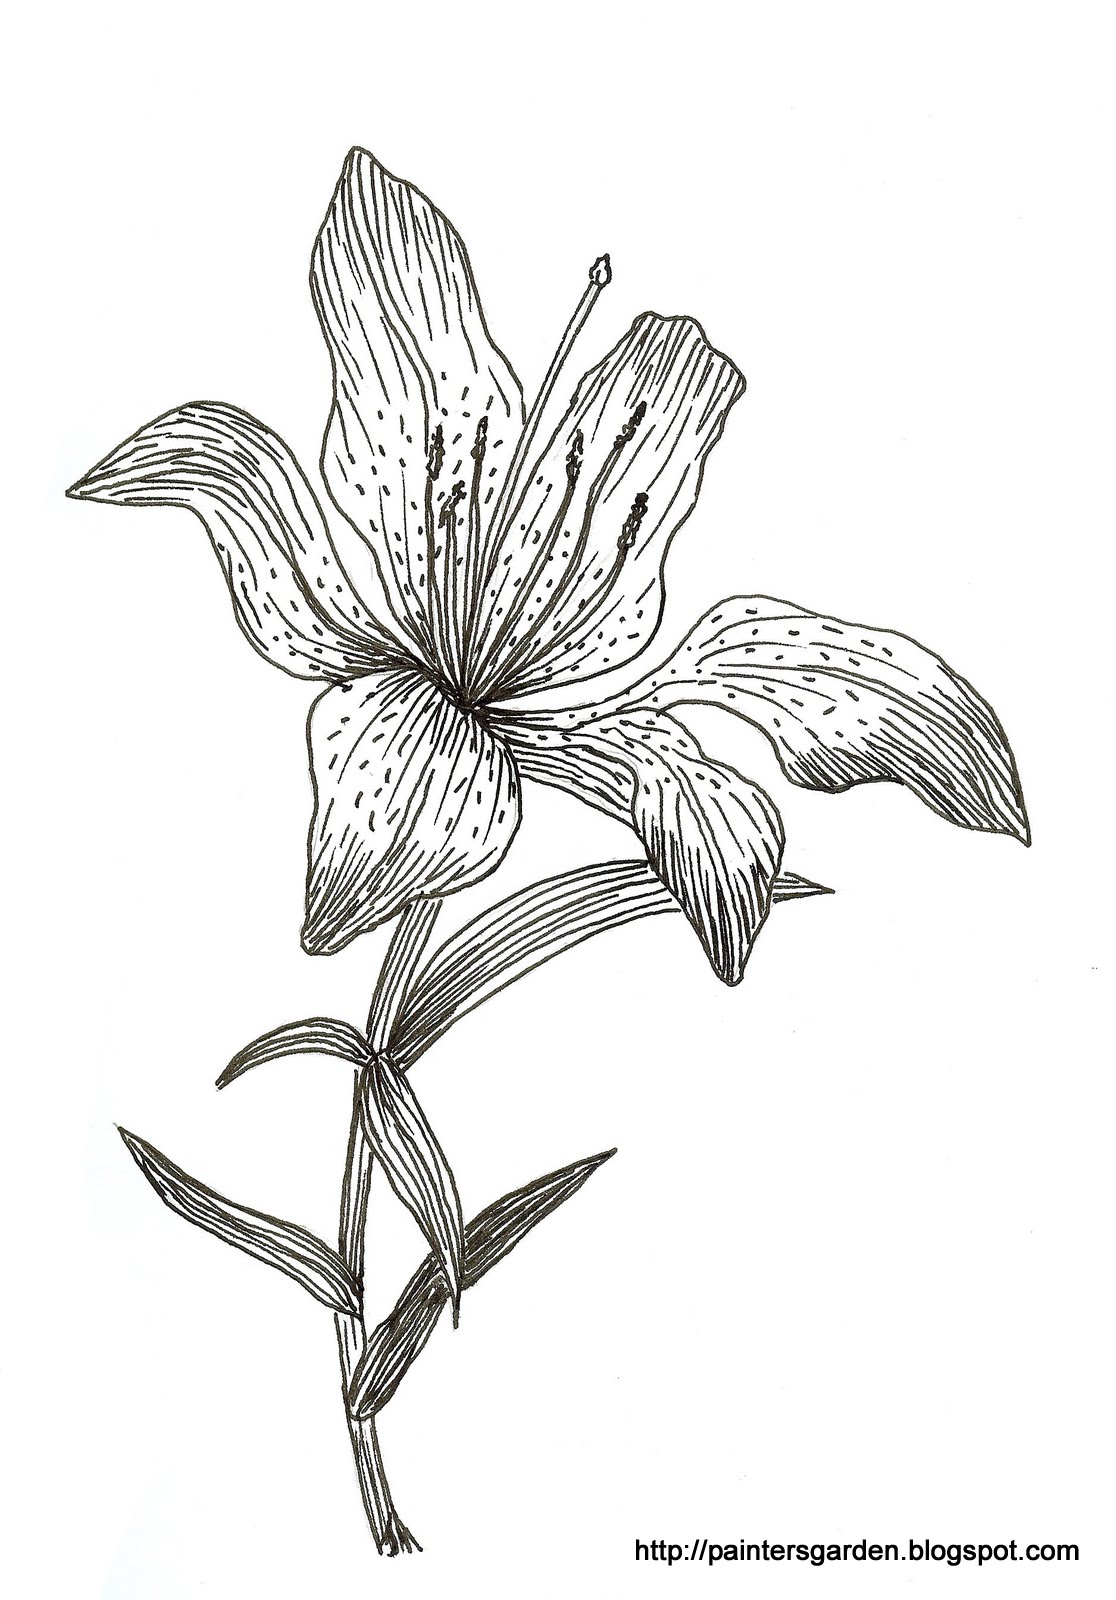 Paintersgarden: New Asiatic Lily Drawing